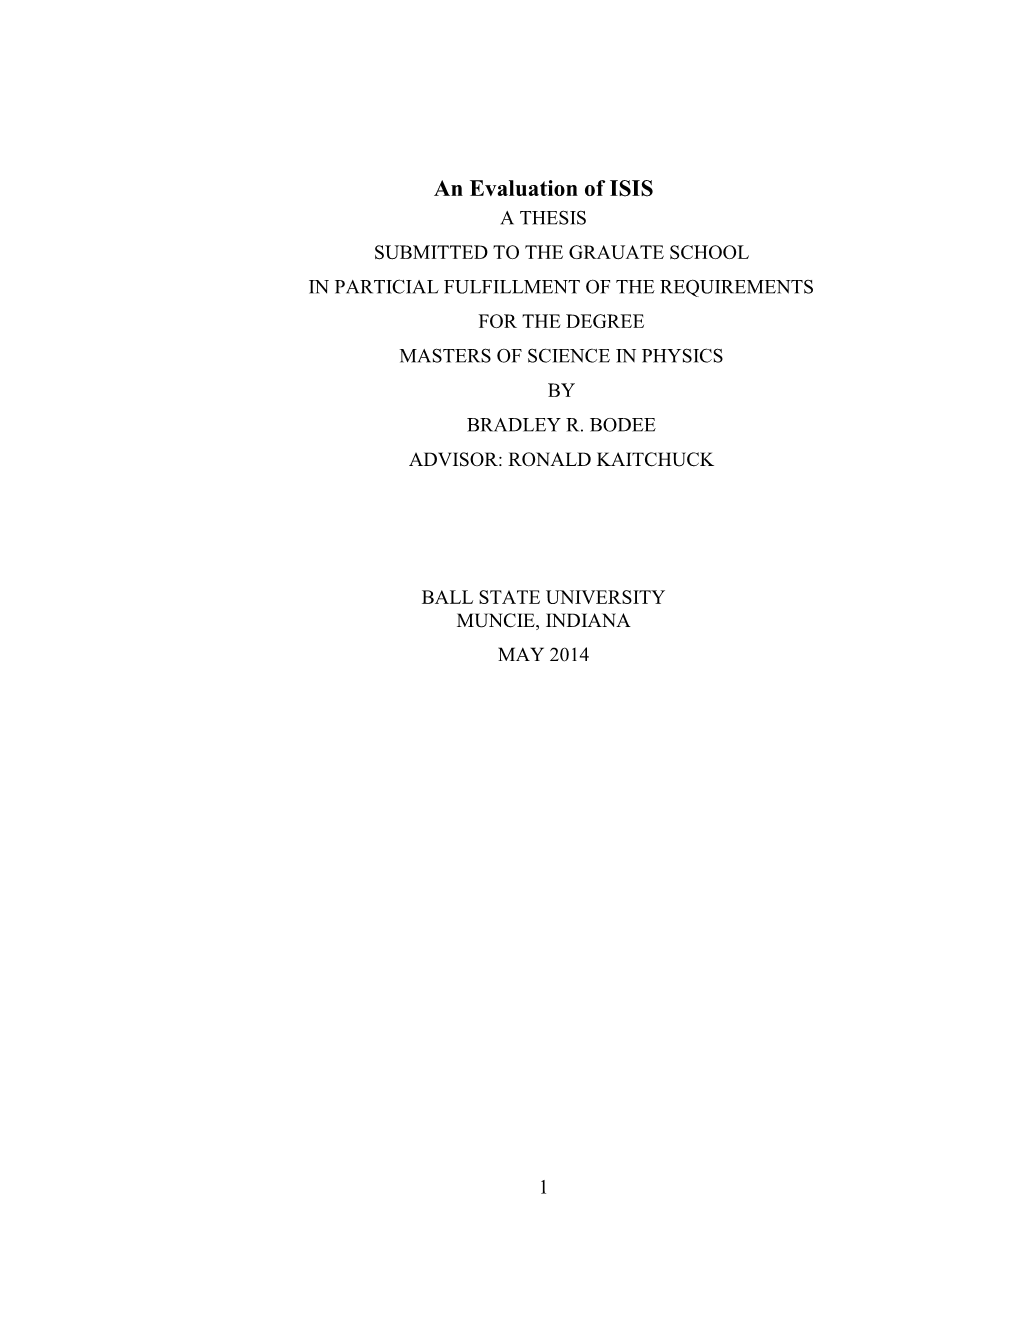 An Evaluation of ISIS a THESIS SUBMITTED to the GRAUATE SCHOOL in PARTICIAL FULFILLMENT of the REQUIREMENTS for the DEGREE MASTERS of SCIENCE in PHYSICS by BRADLEY R